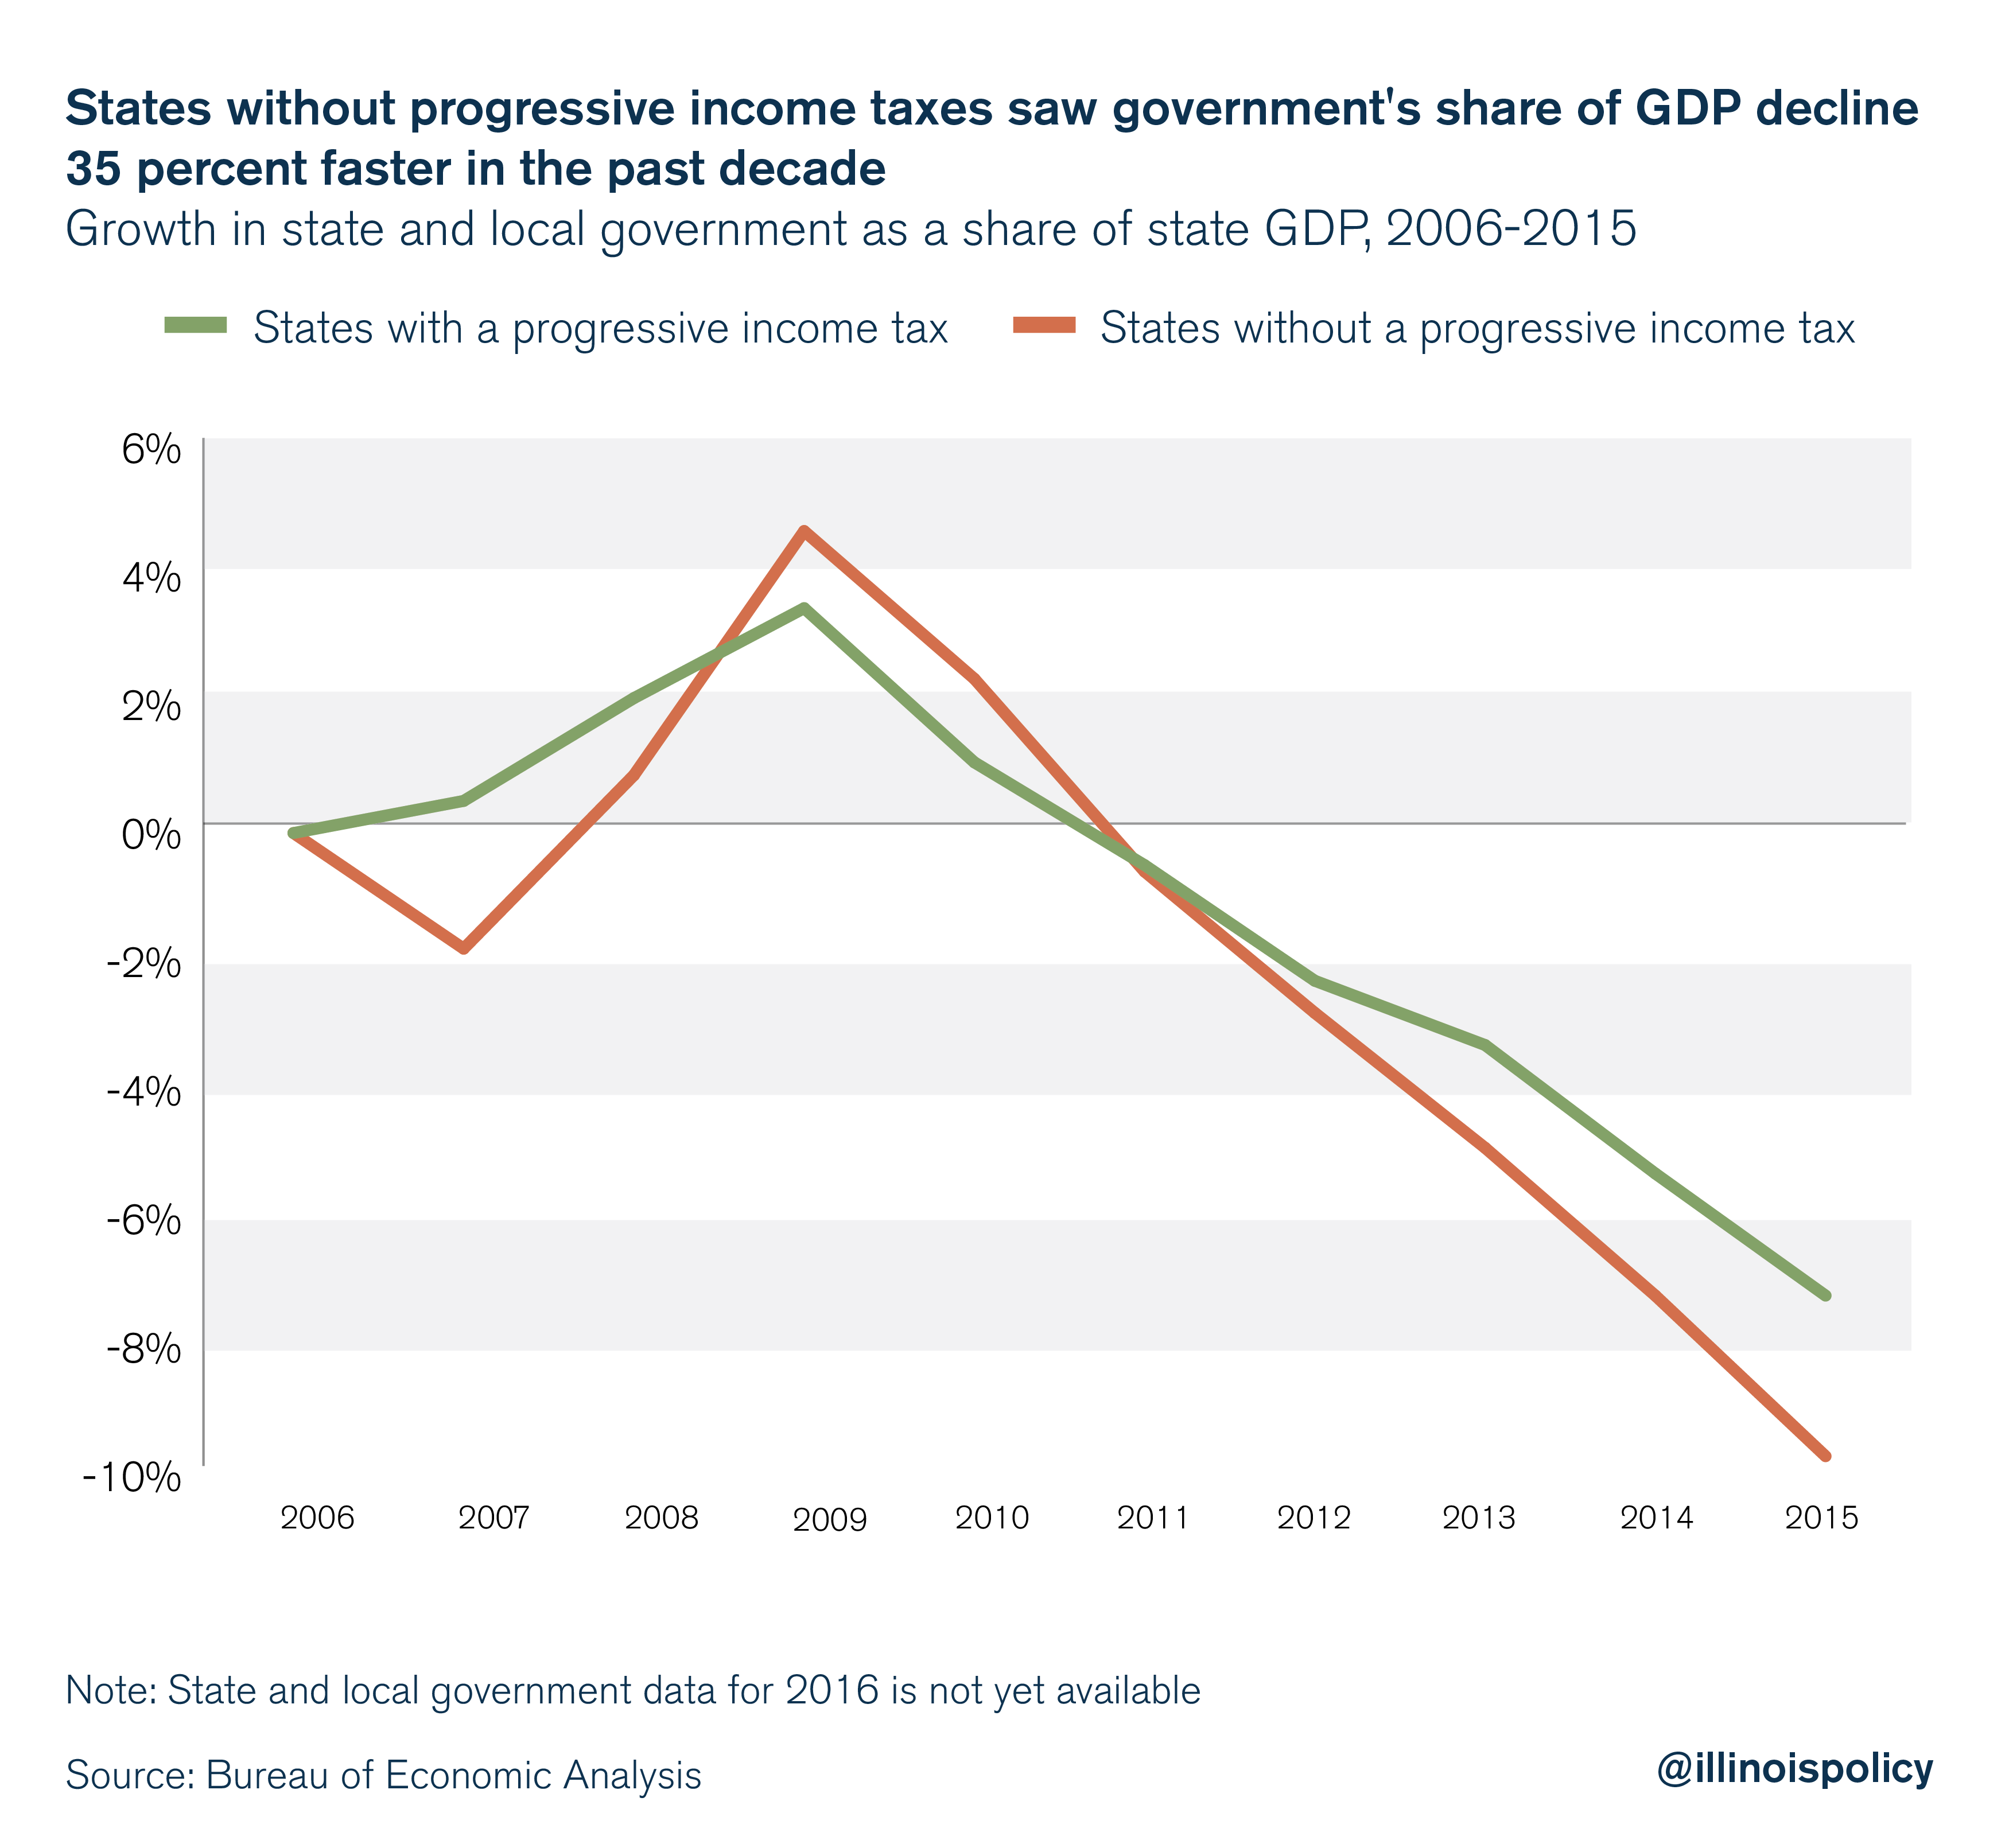 States without progressive income taxes saw government's share of GDP decline 35 percent faster in the past decade